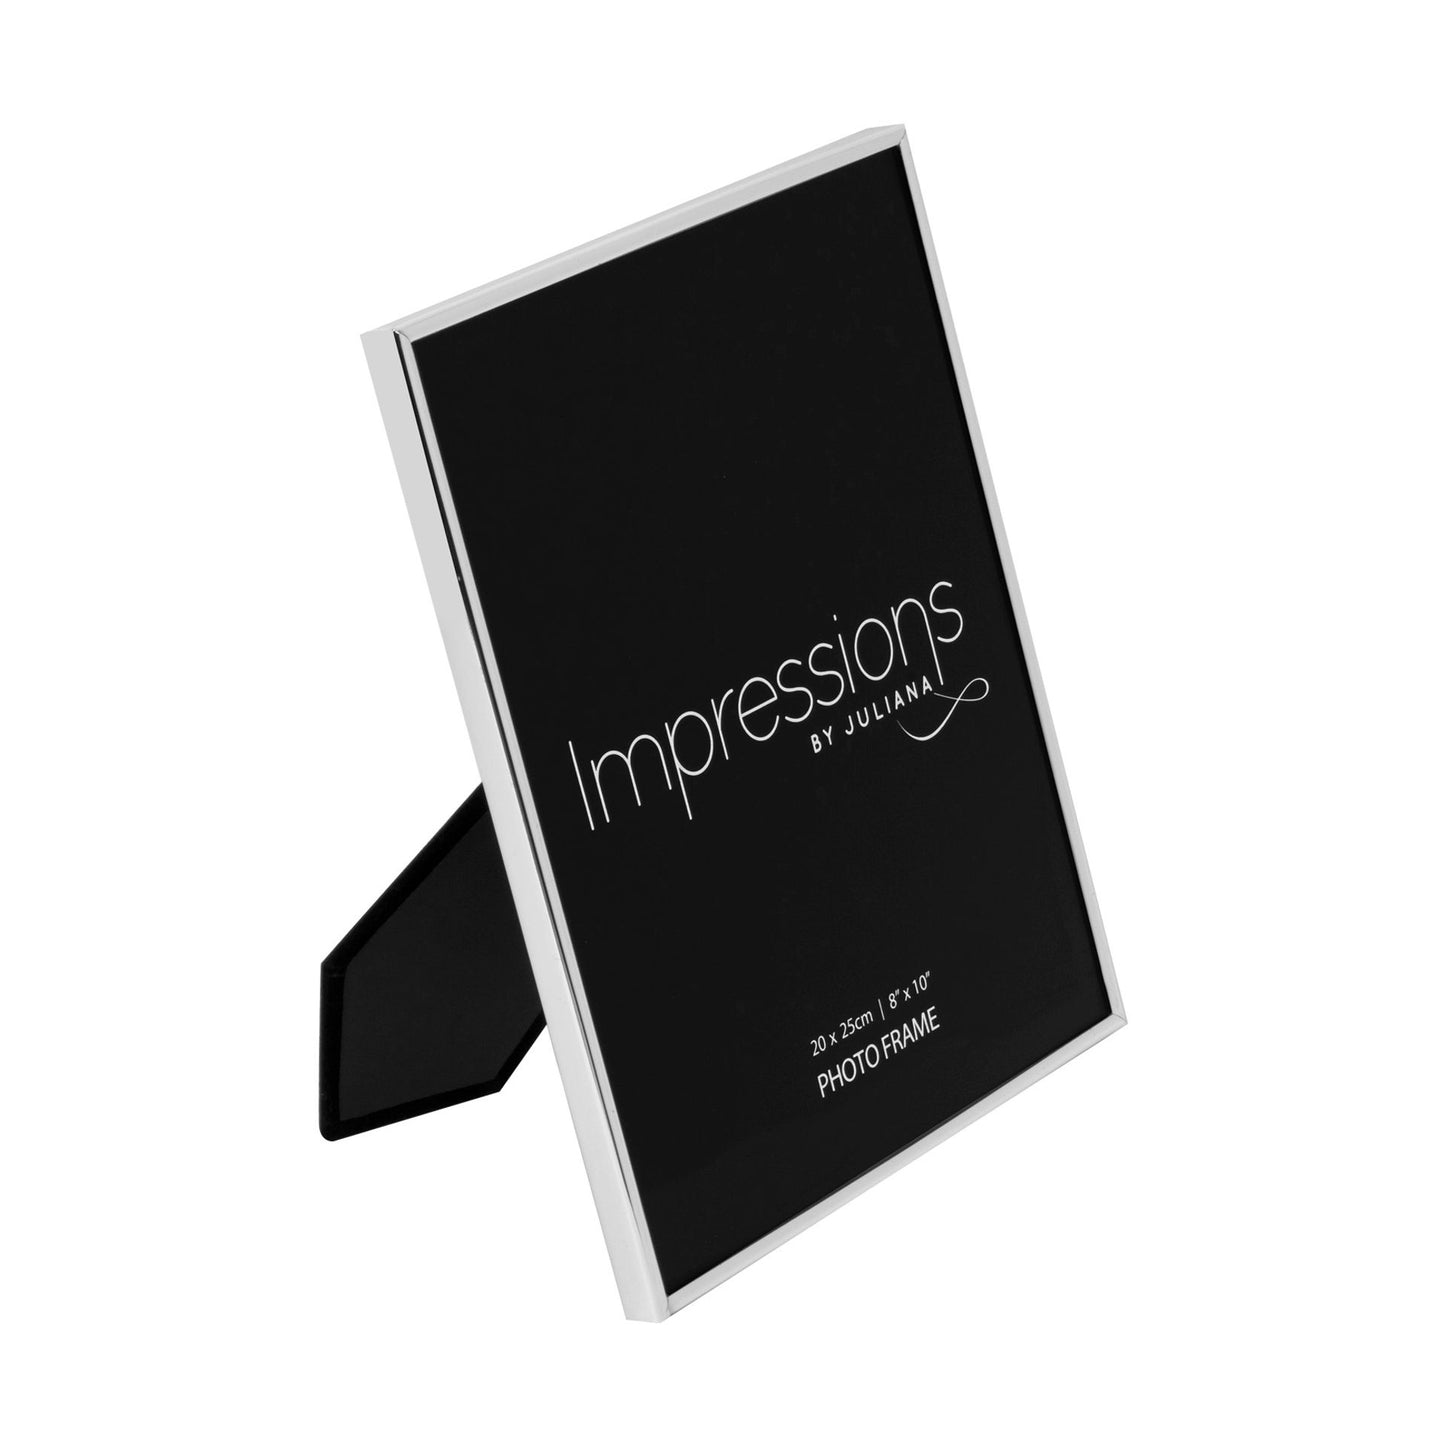 Impressions by Juliana | Silver Plated 10x8 Inch Photo Frame